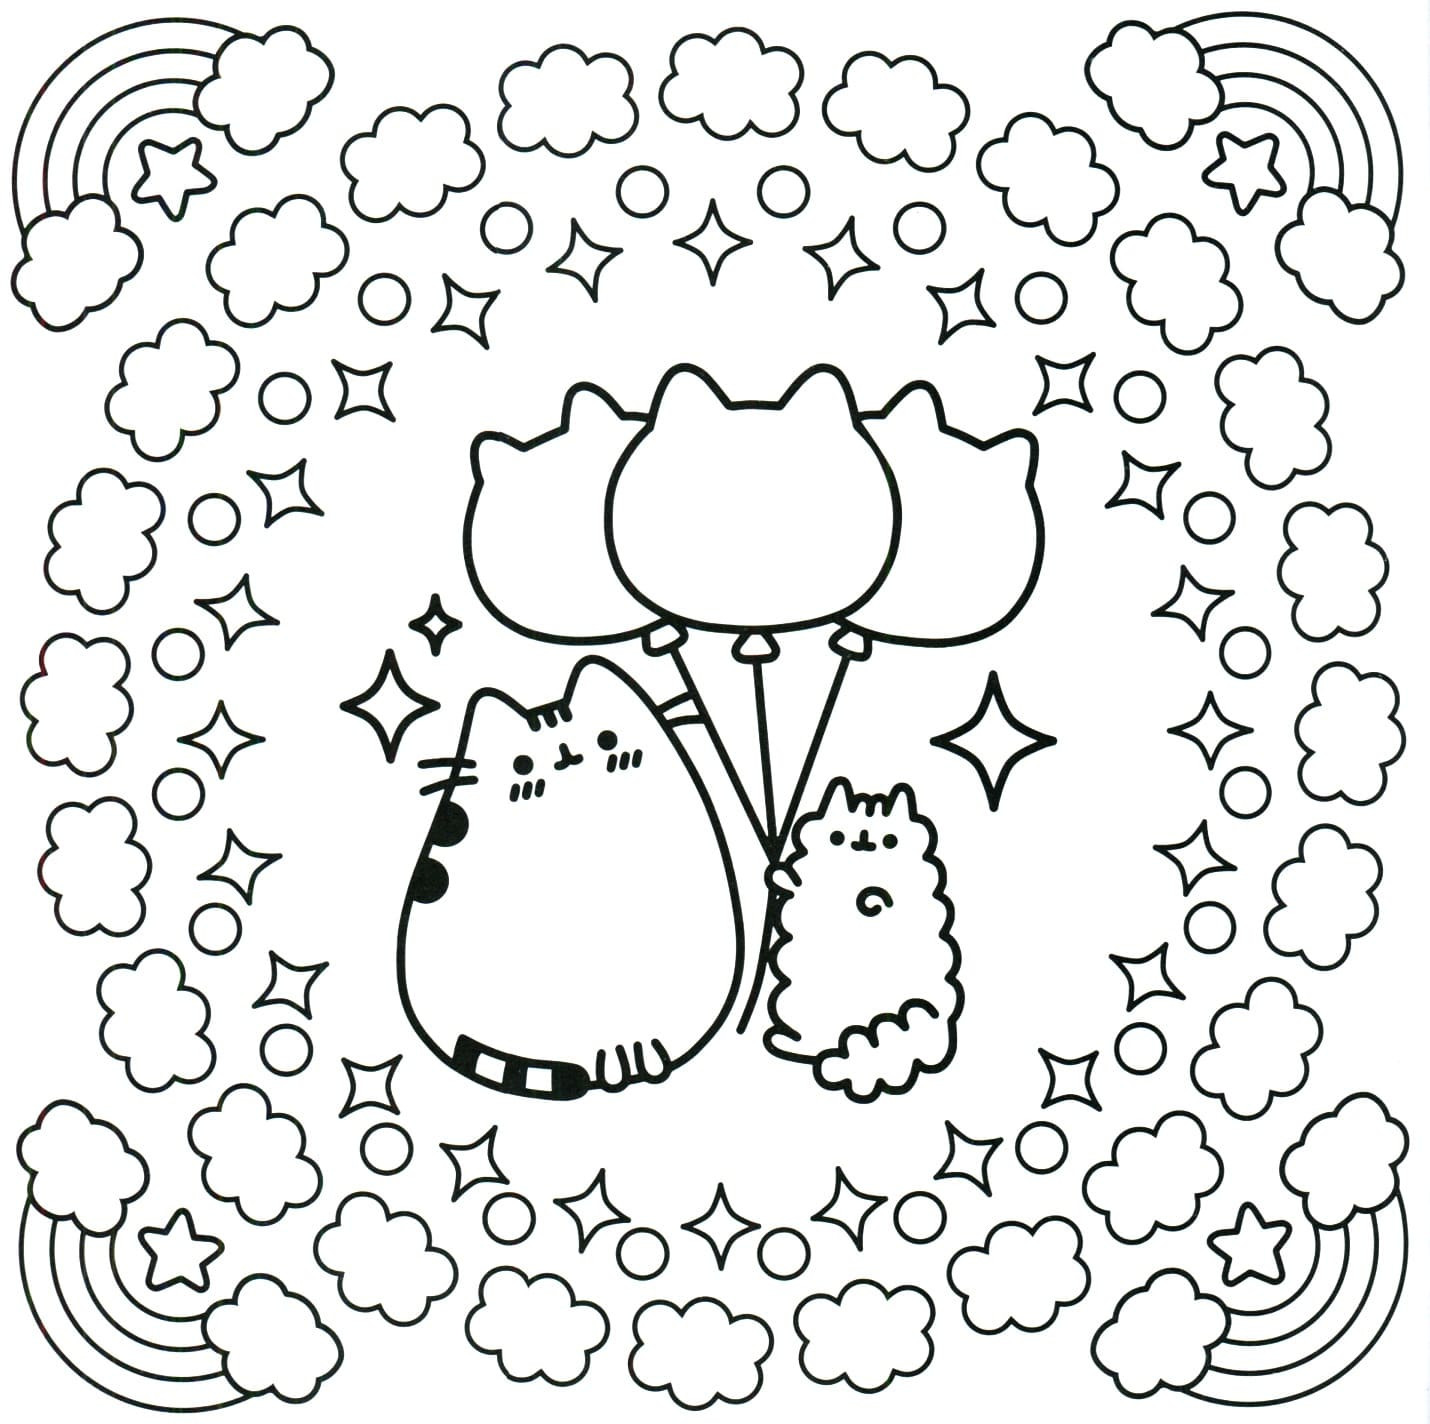 Printable Pusheen Coloring Pages
 Pusheen Coloring Pages Print Them line for Free